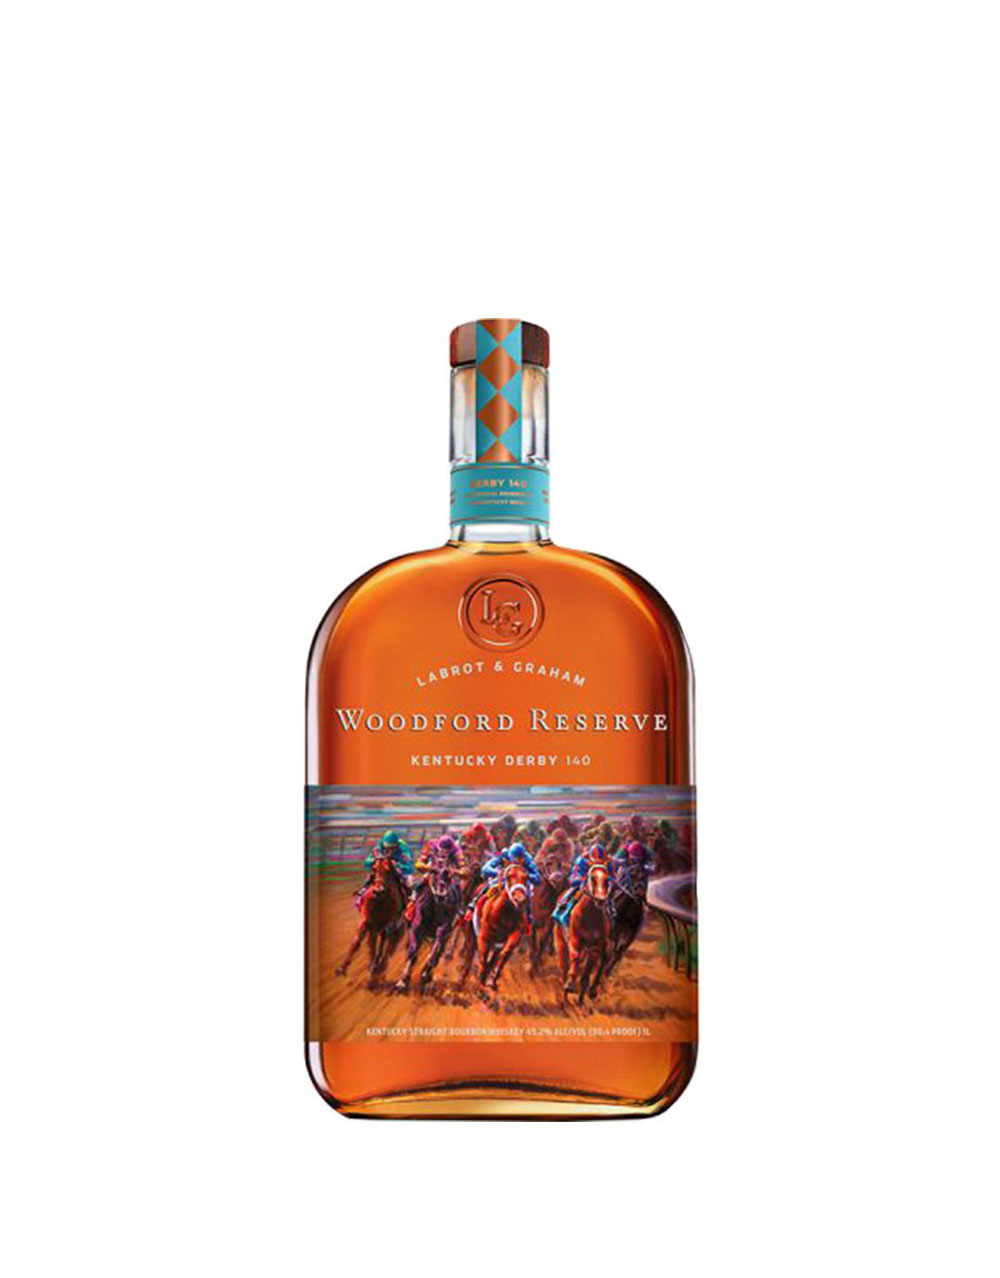 Woodford Reserve Kentucky Derby 140 Limited Edition Bourbon Whiskey